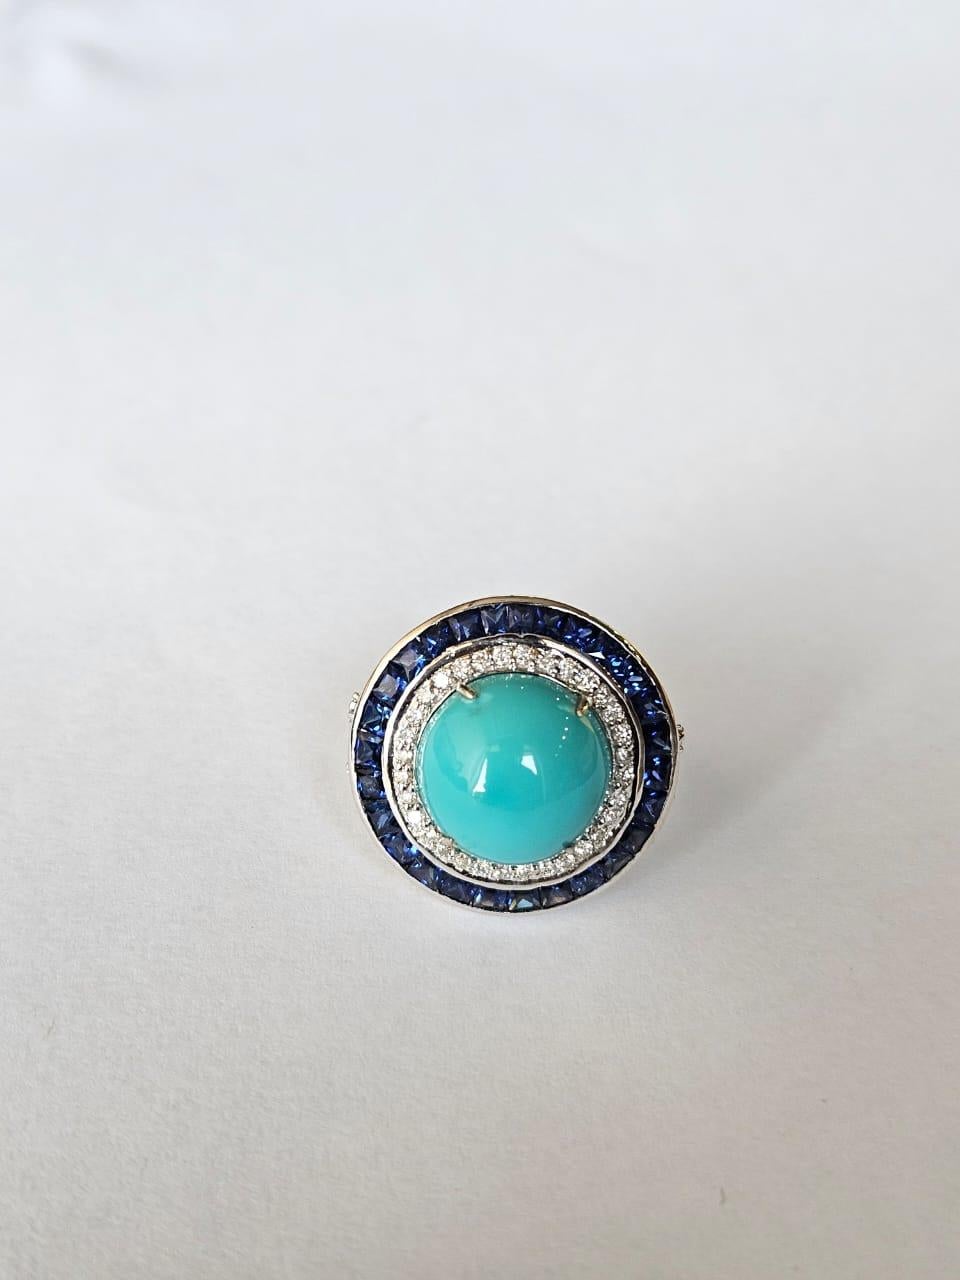 Women's or Men's Set in 18K Gold, 8.65 carats Turquoise, Blue Sapphires & Diamonds Cocktail Ring For Sale